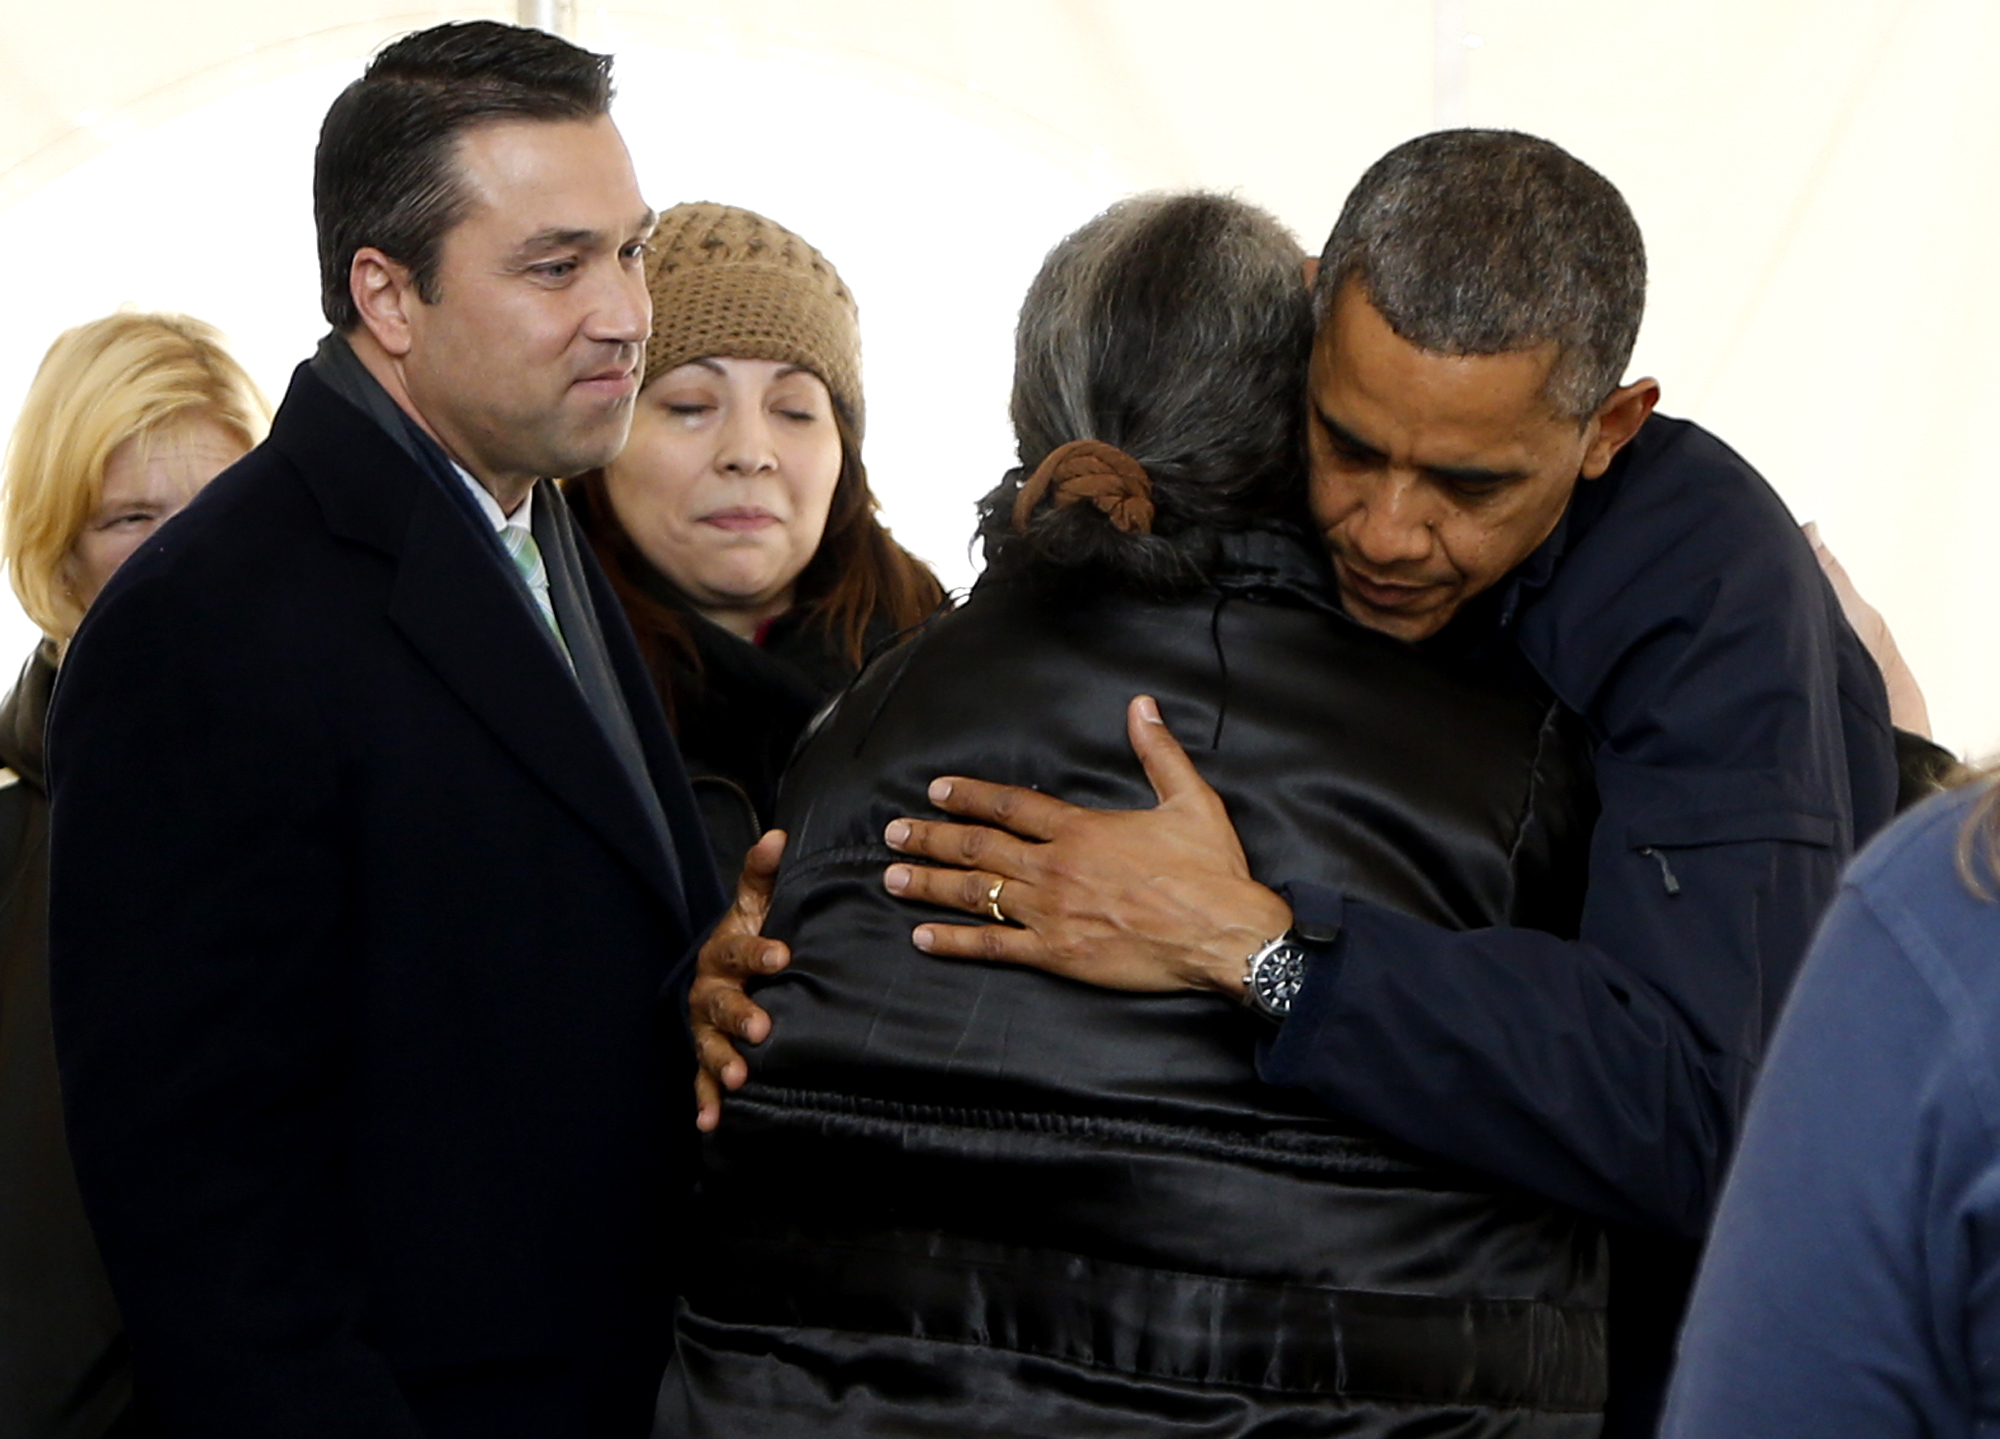 President Barack Obama hugs a woman as he visits the FEMA recovery center on the grounds of New Dorp High School, Thursday, Nov. 15, 2012  on Staten Island, in New York. At left is Rep. Michael Grimm, R-N.Y. (AP Photo/Carolyn Kaster)